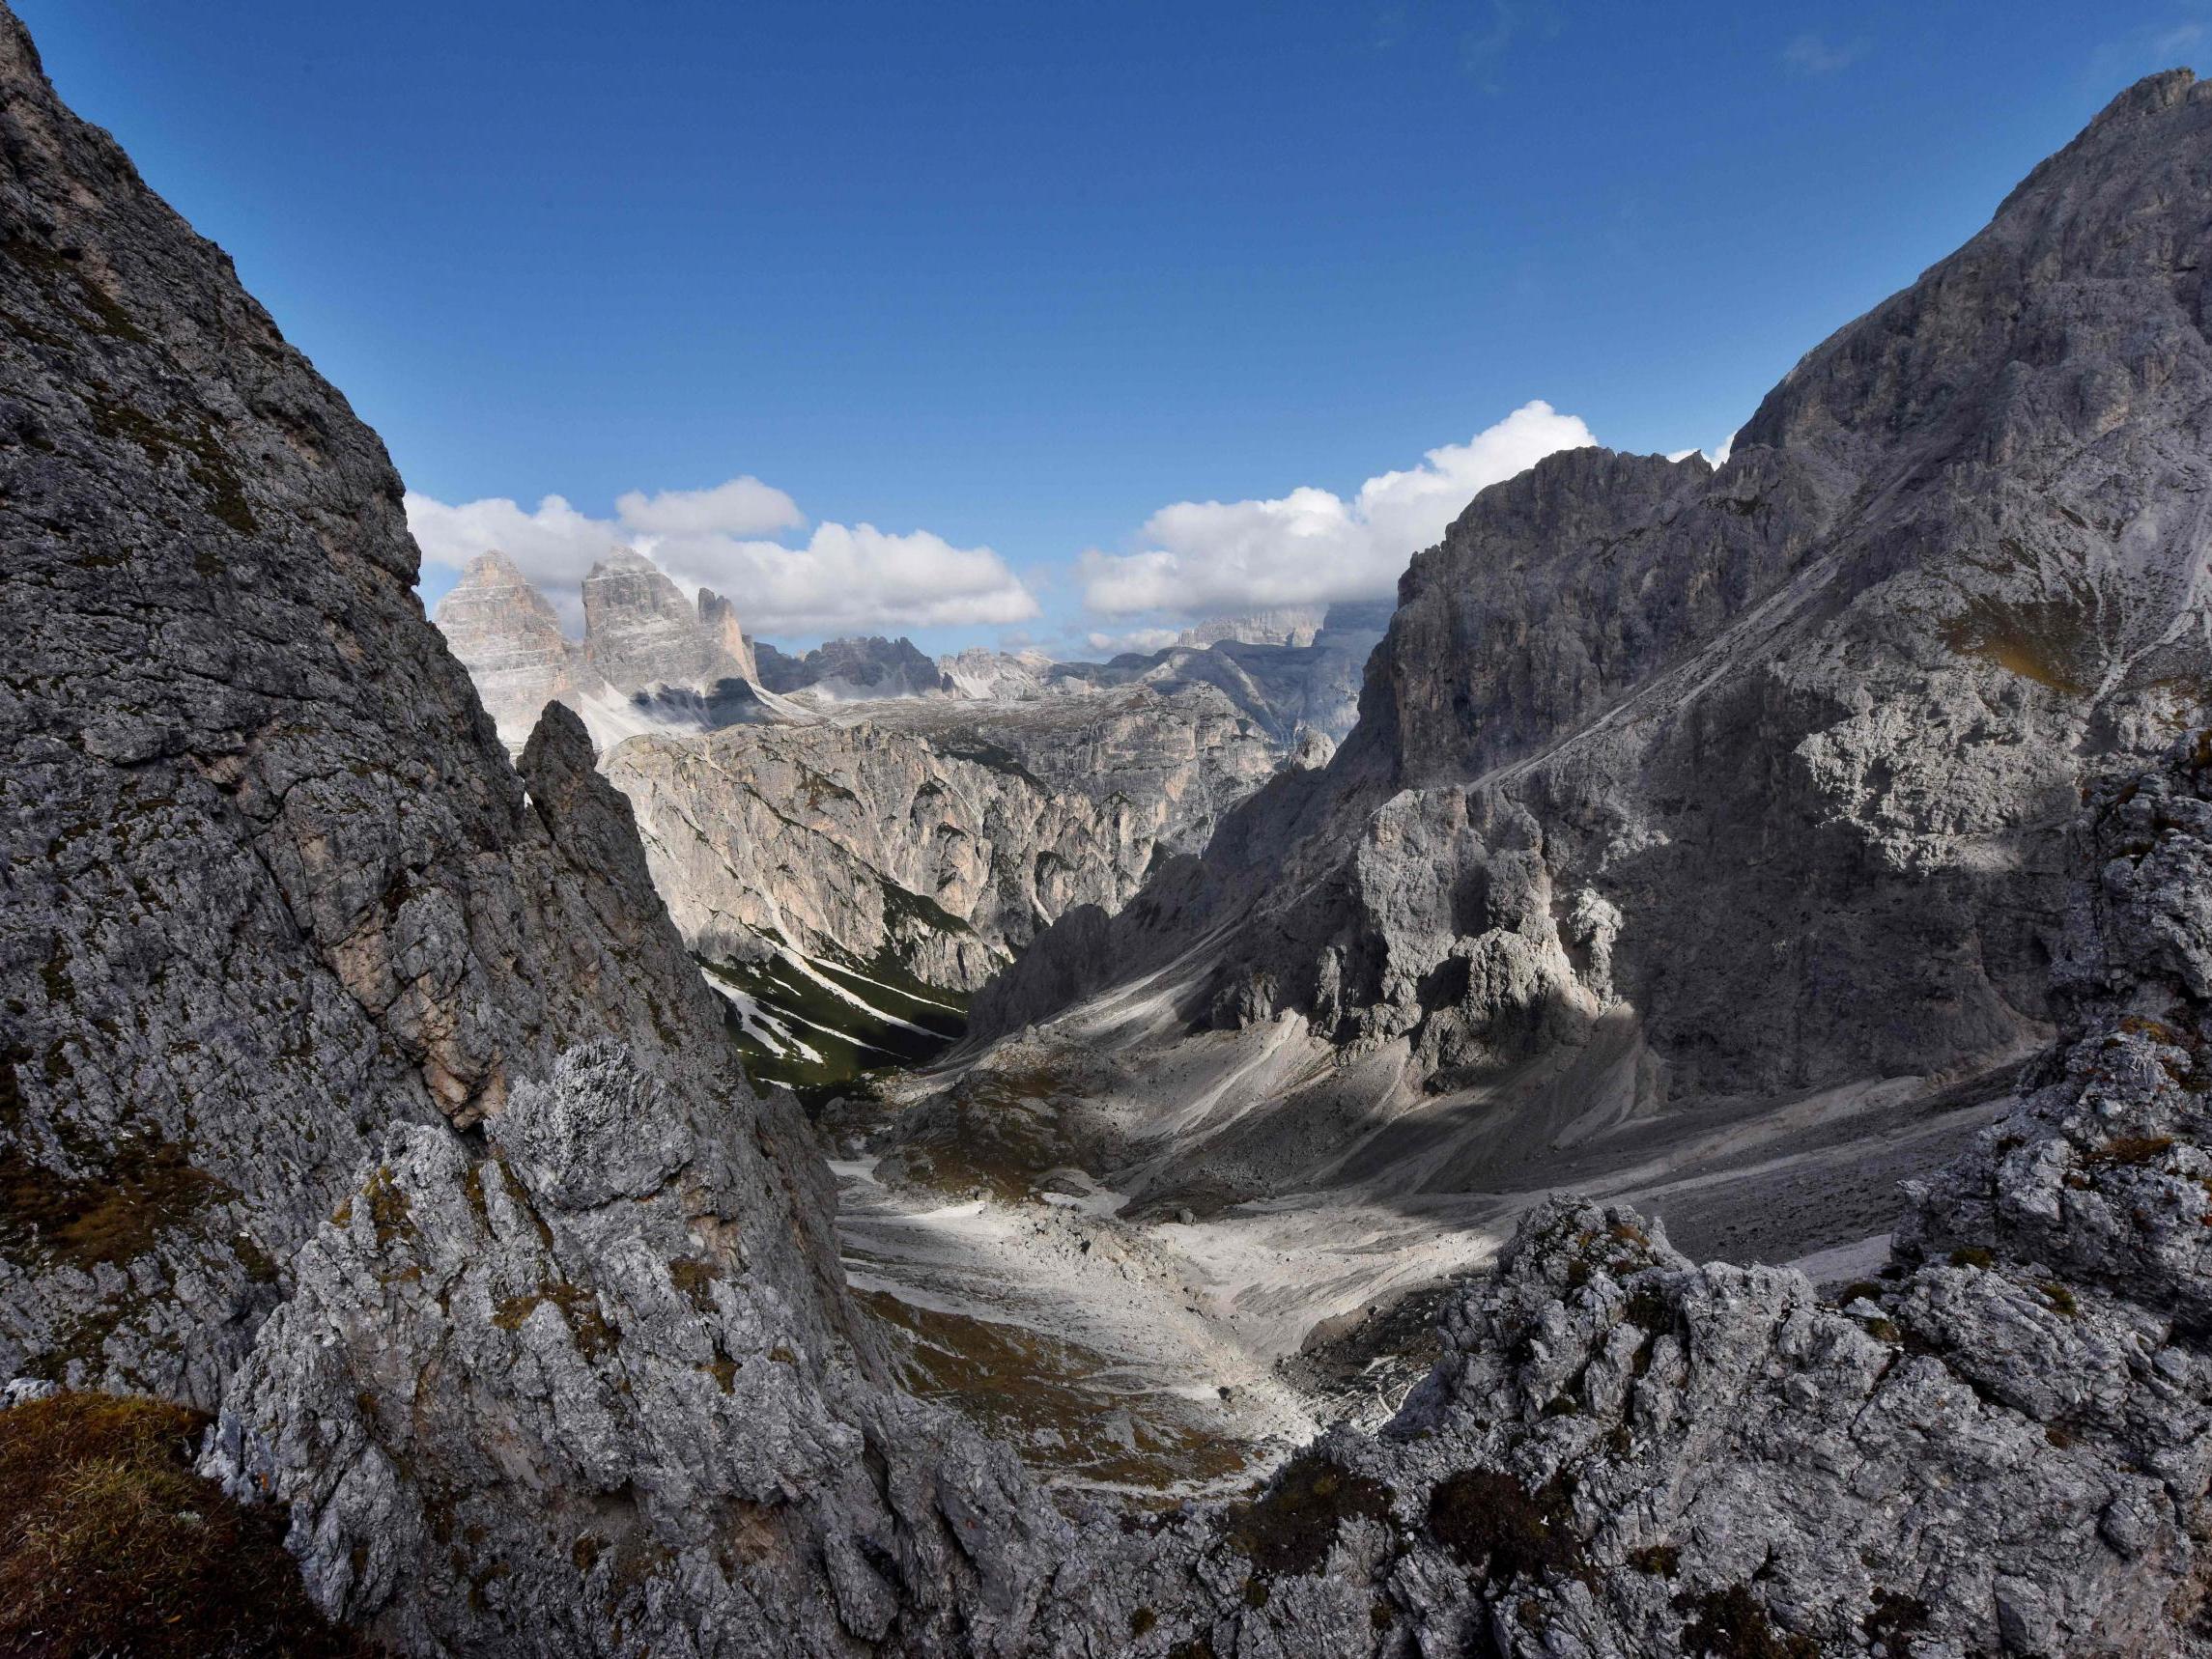 A British man has died while base jumping in Italy's Dolomites mountains